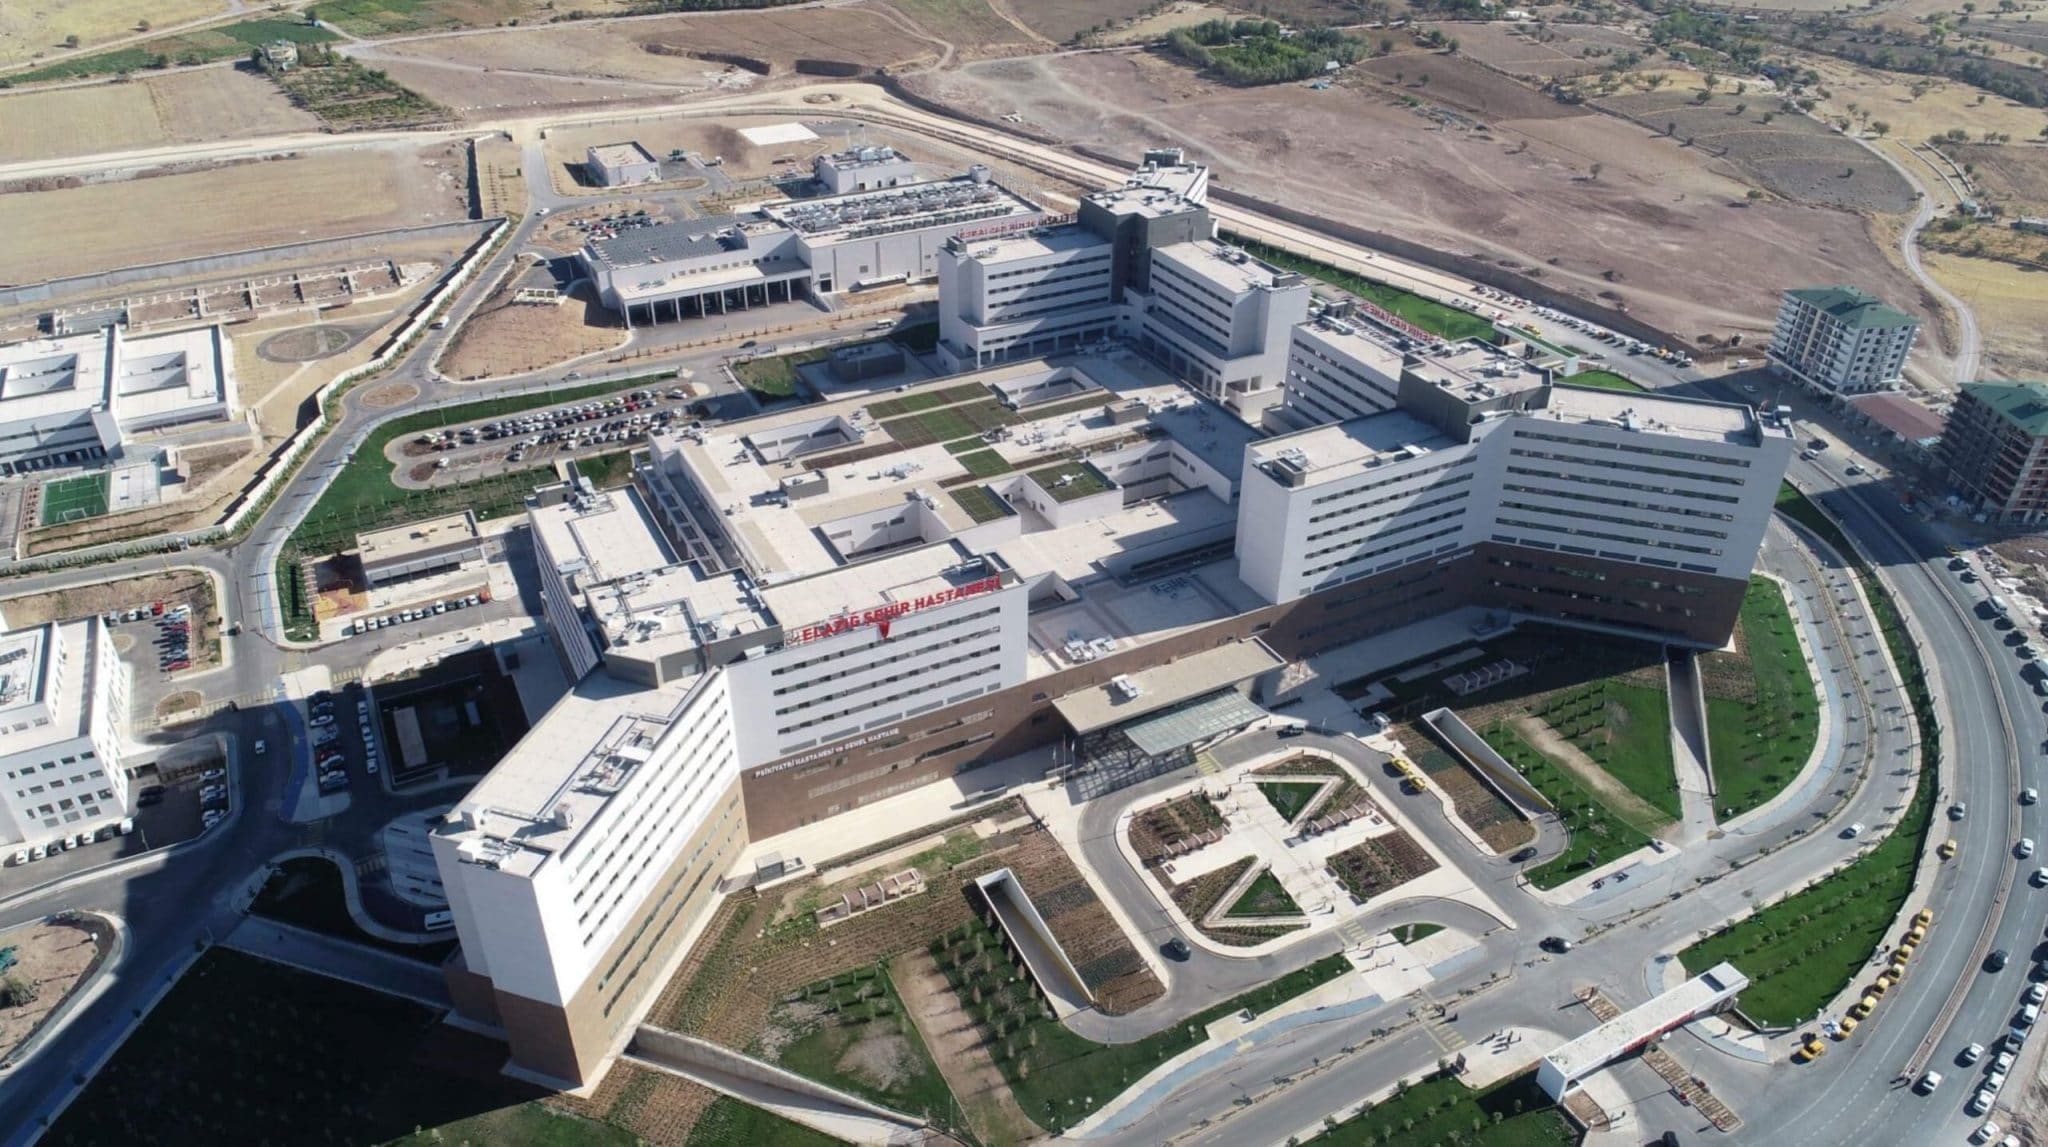 Aerial view of hospital and grounds